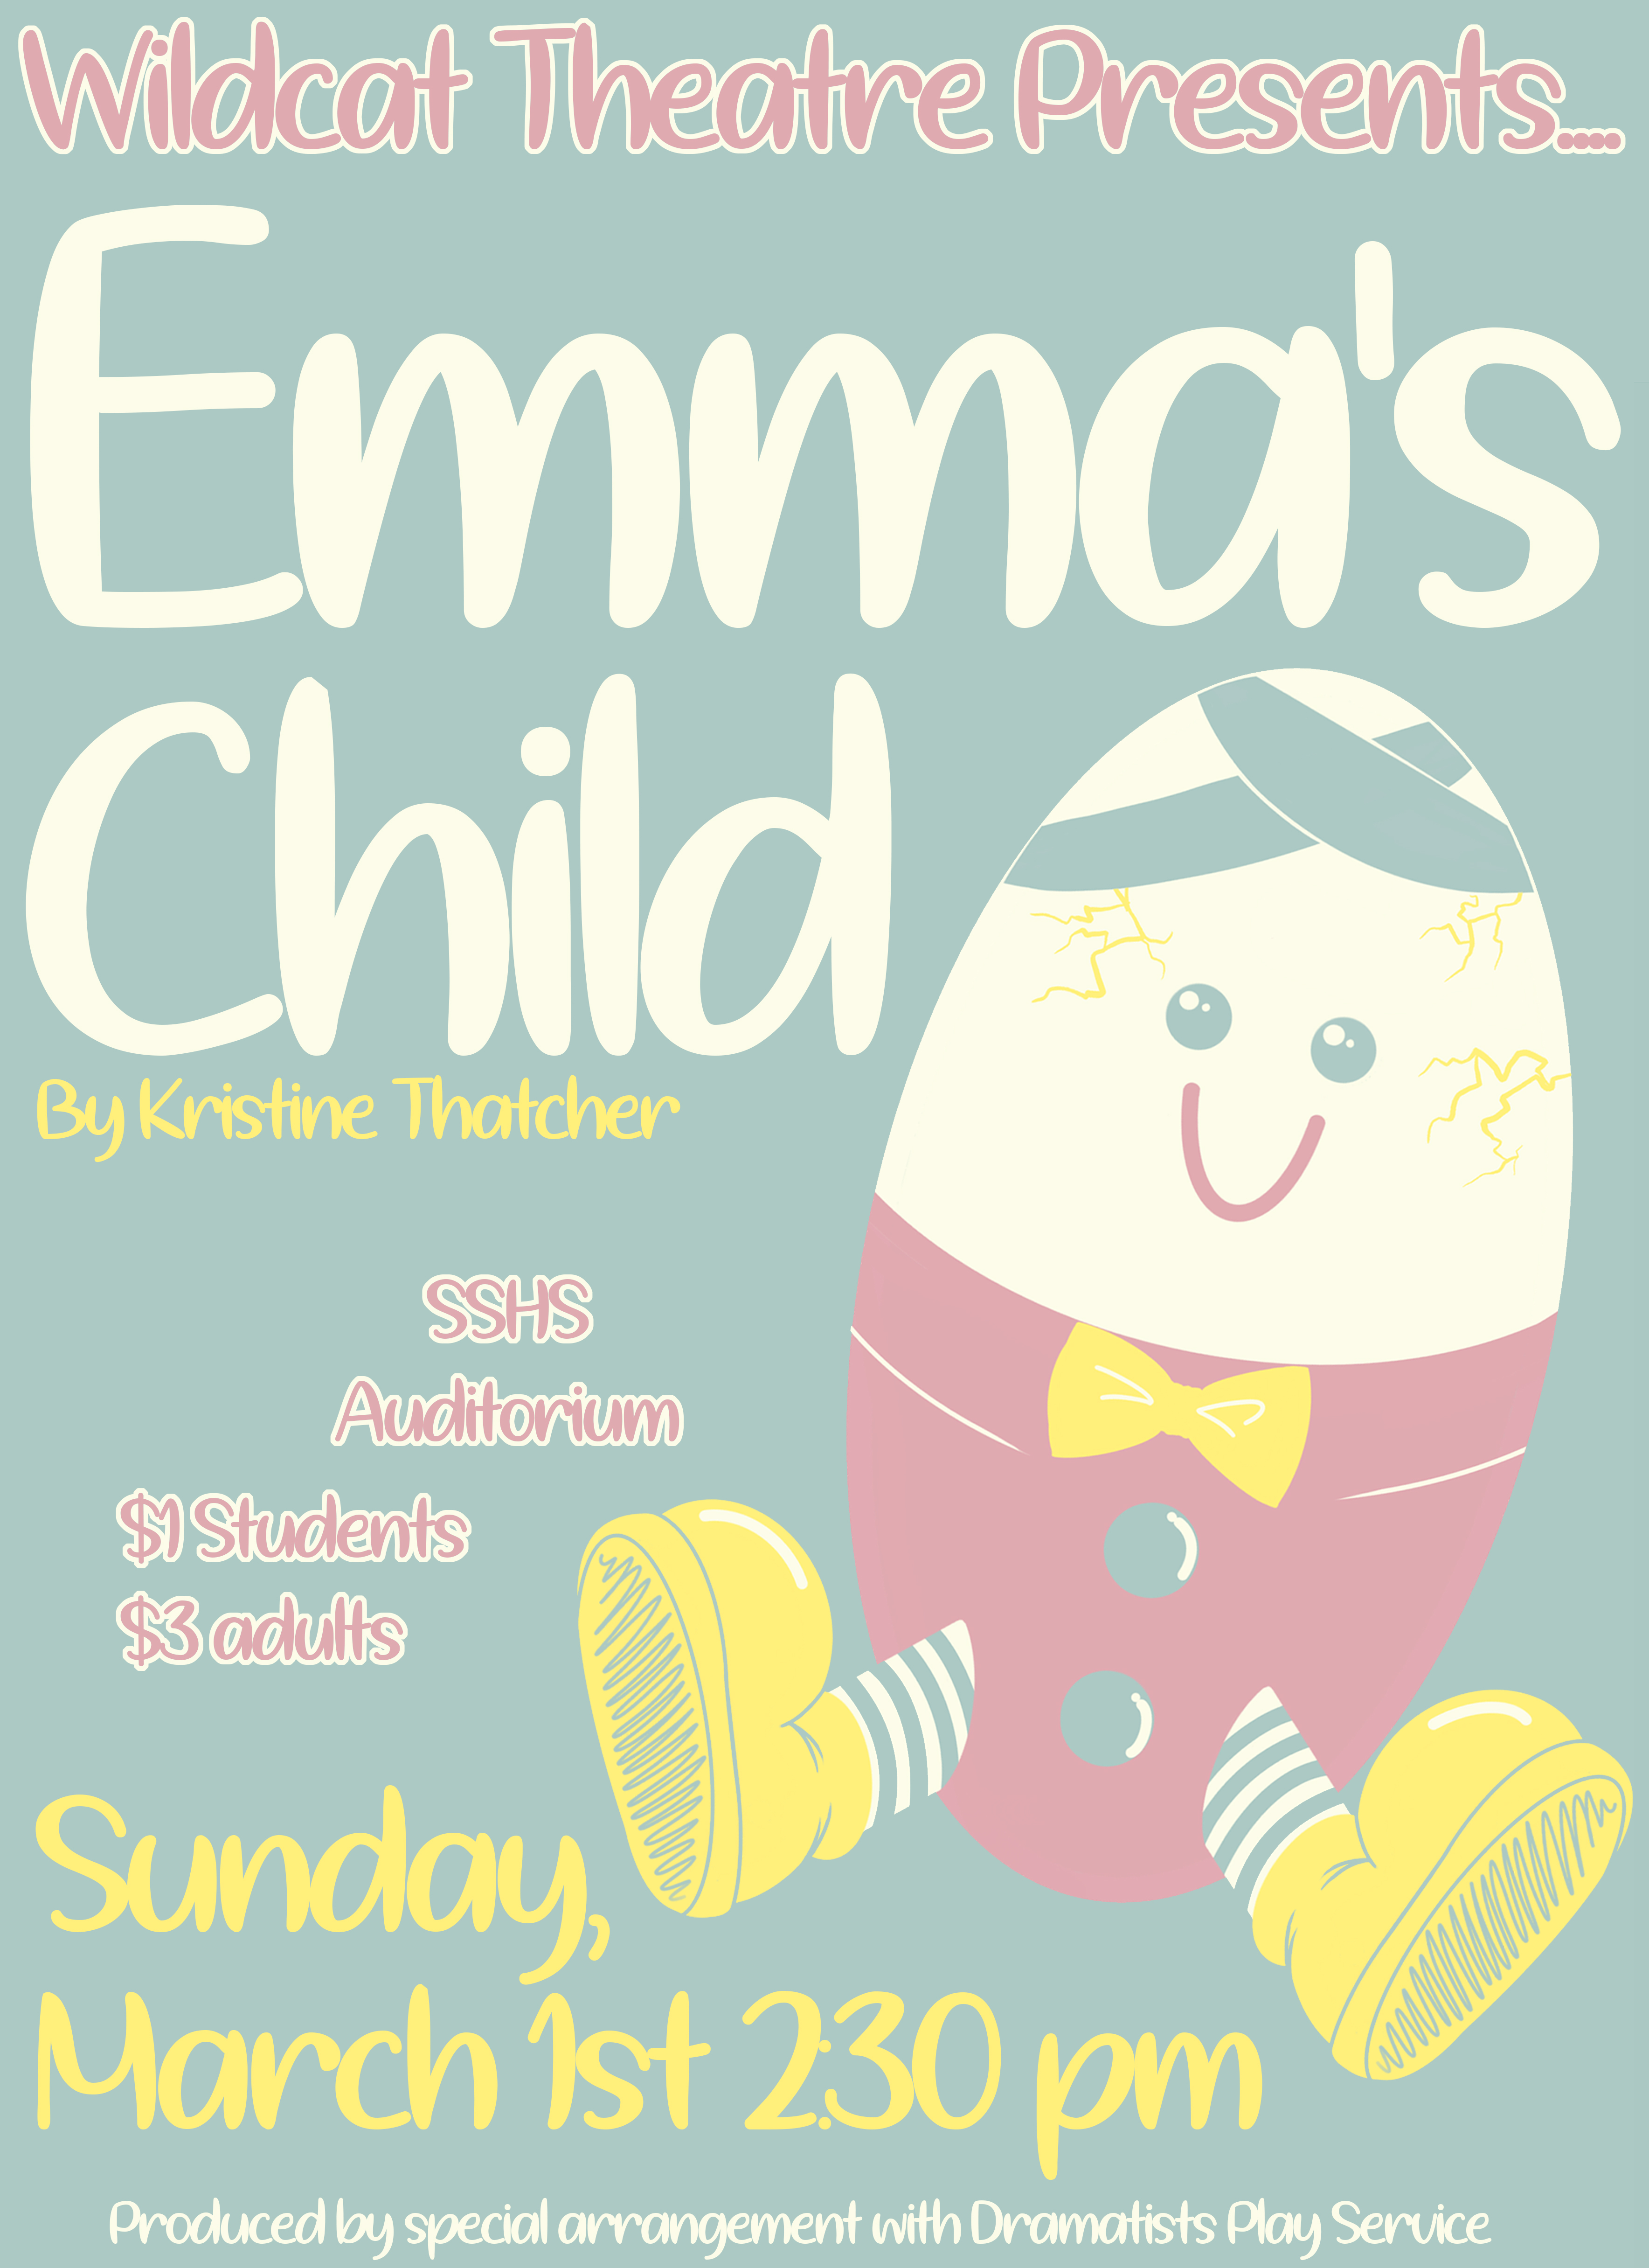 SSHS Theatre Performing One Act Play “Emma’s Child” for Public on Sunday, March 1st